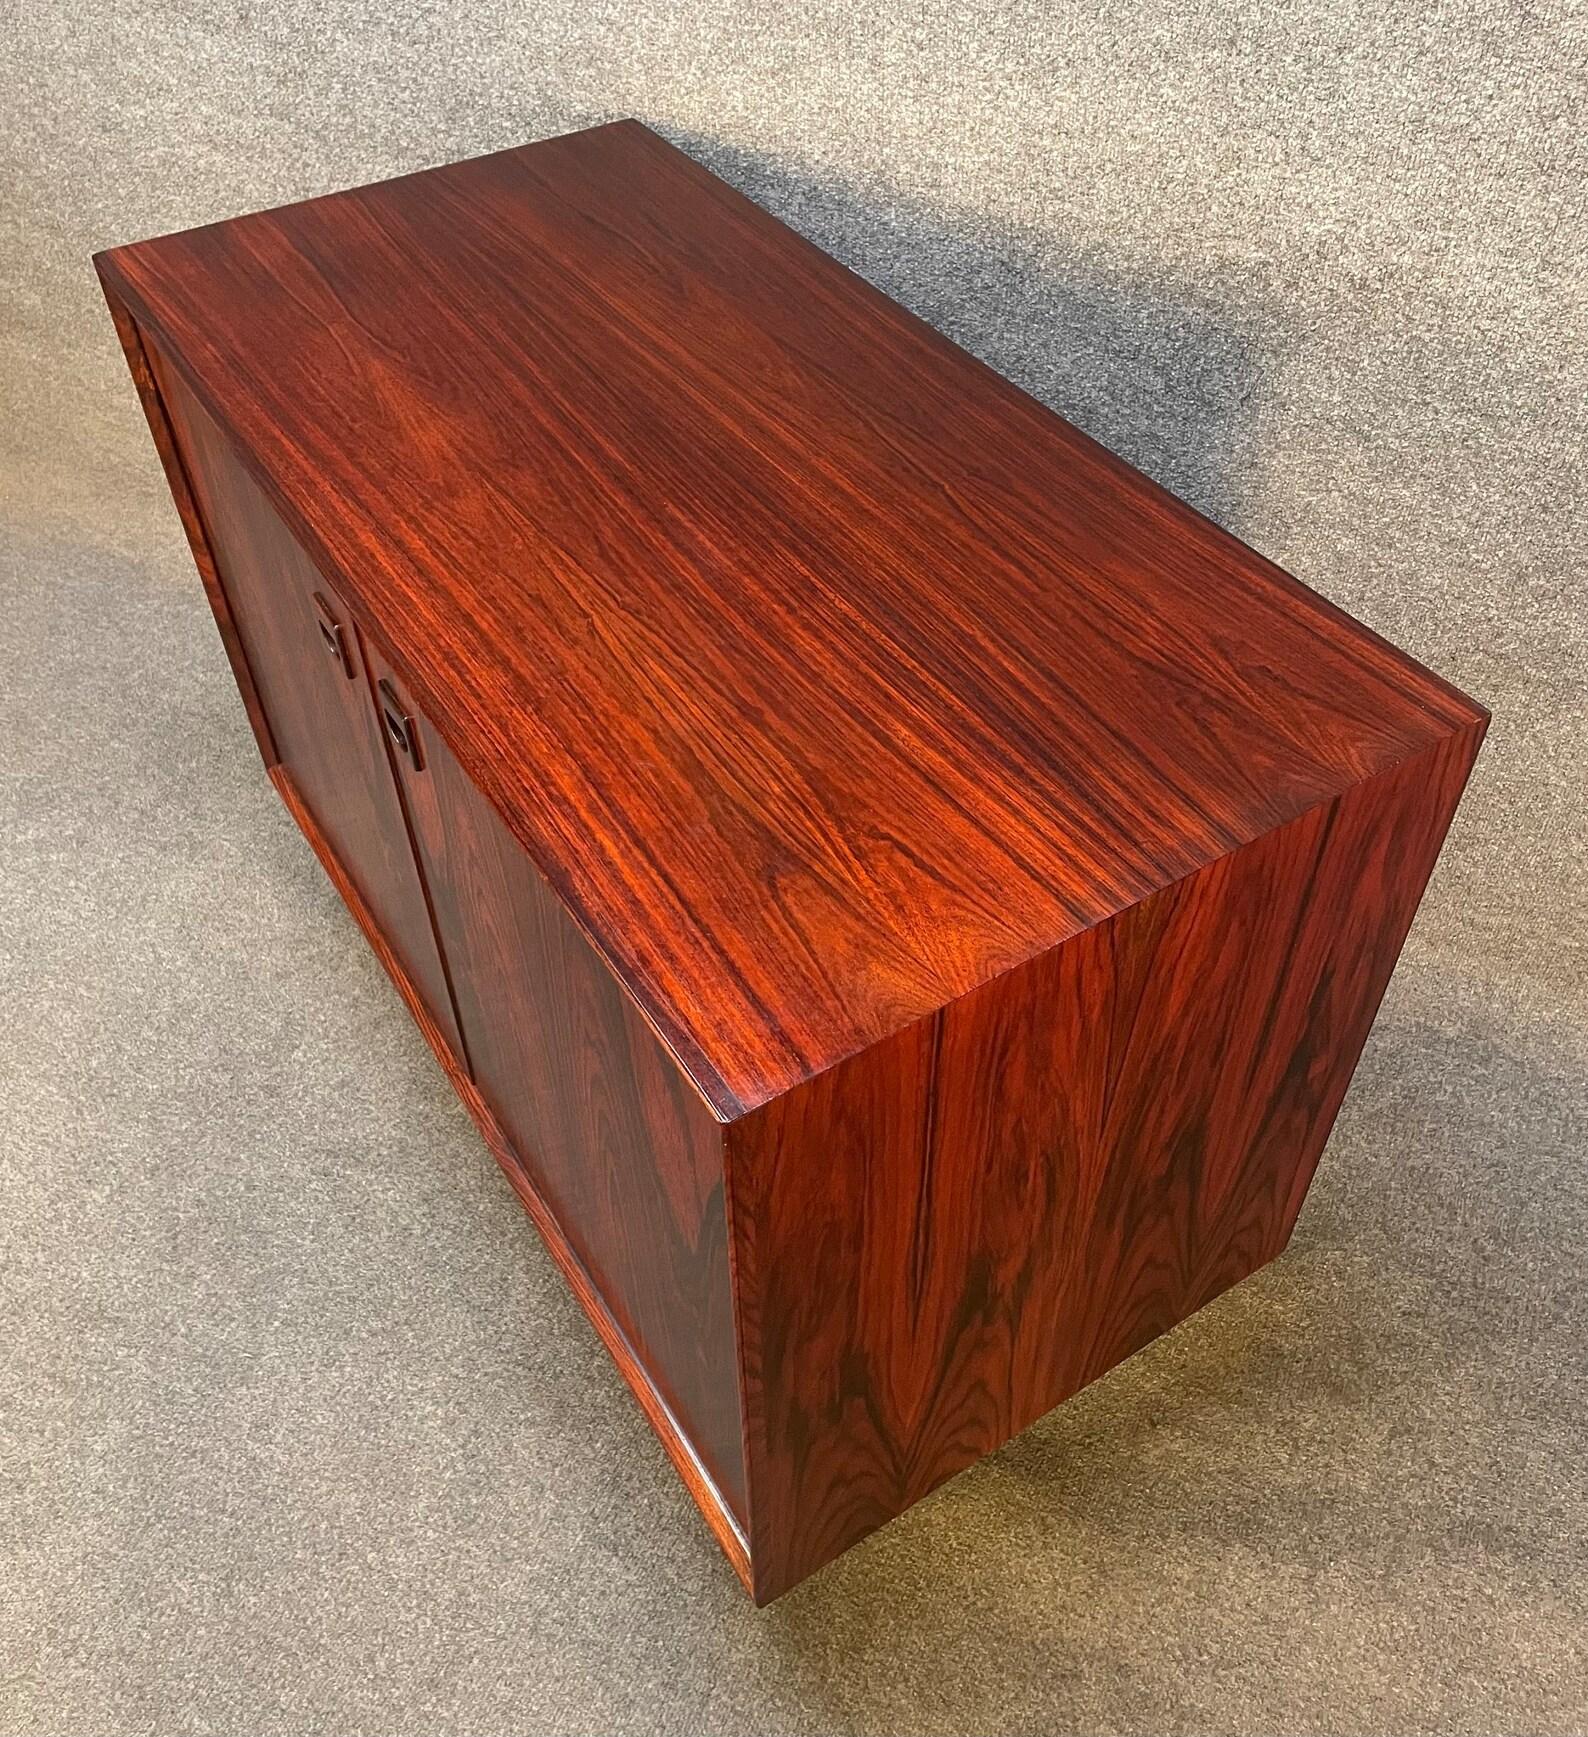 Here is a beautiful scandinavian modern cabinet in Brazilian rosewood manufactured by Brouer Moblefabrik in Denmark in the 1960's. This lovely piece, recently imported from Europe to California before its refinishing, features a vibrant wood grain,